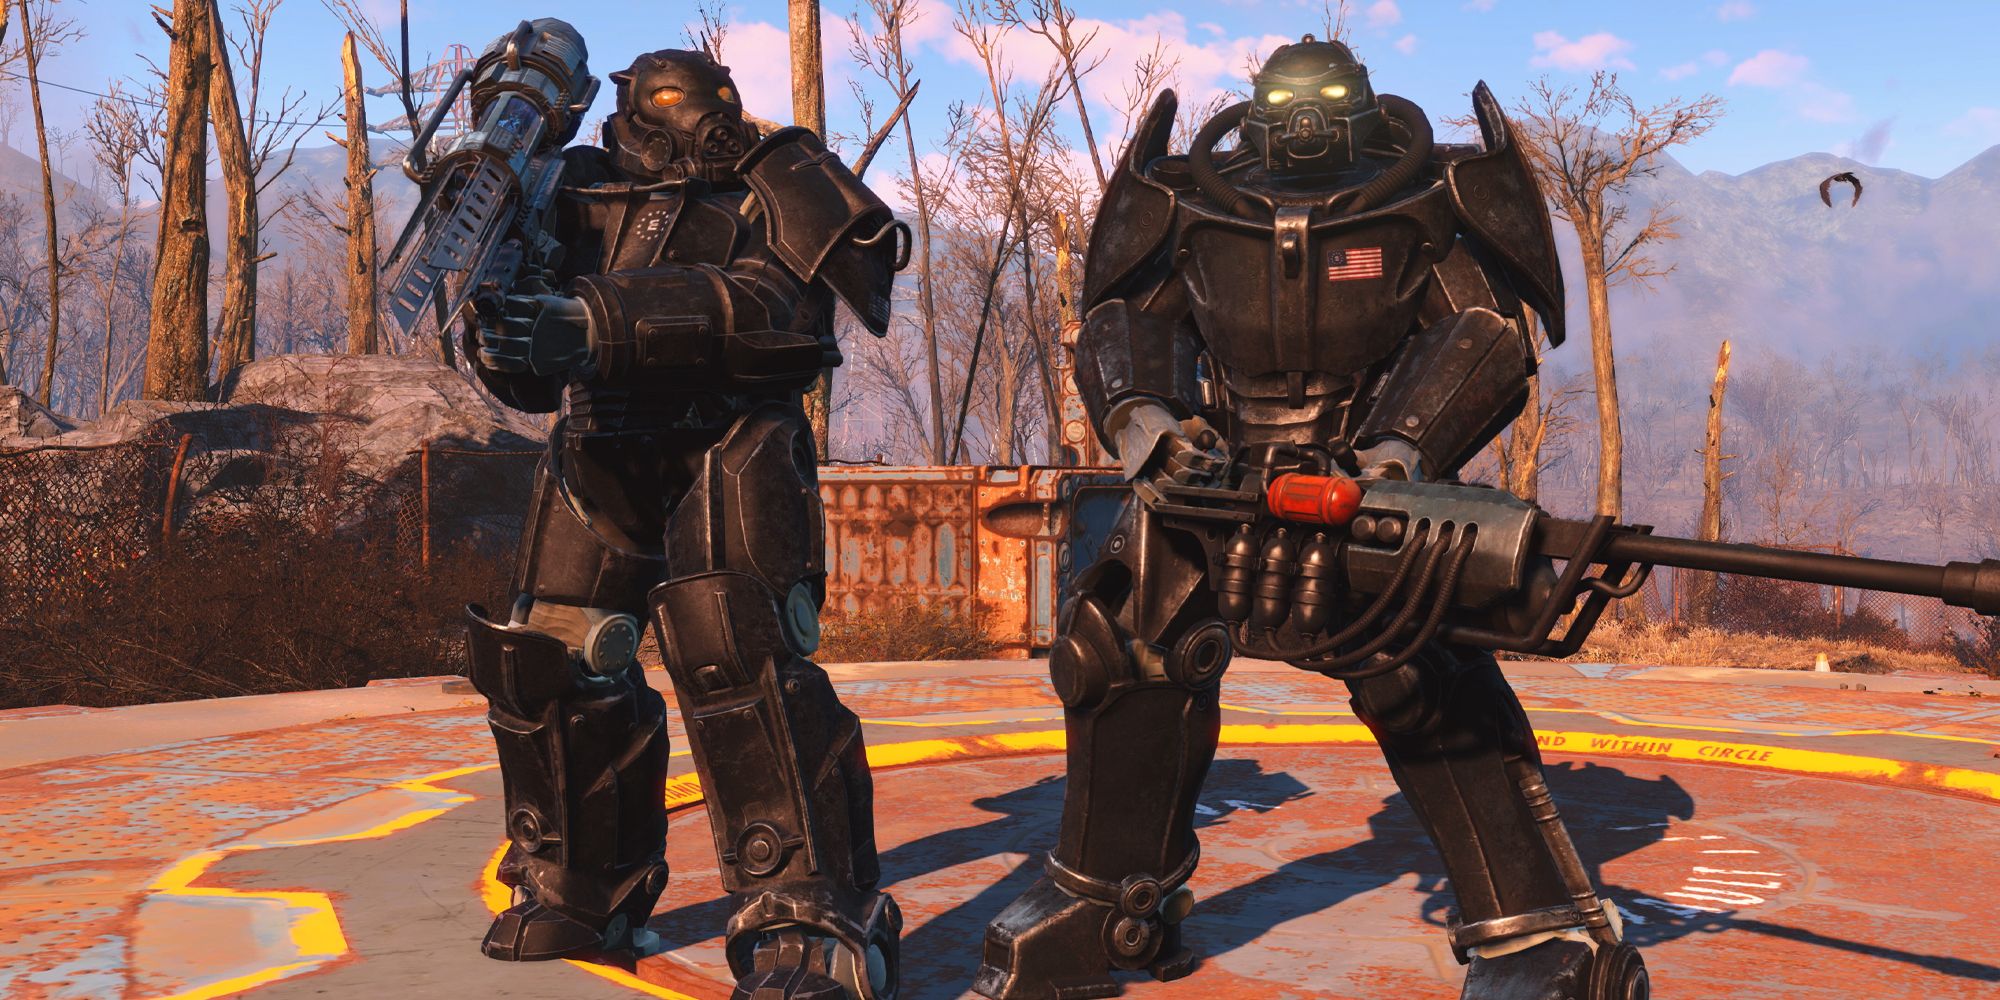 10 Fallout Spin-Offs We Want To Play While Waiting For Fallout 5